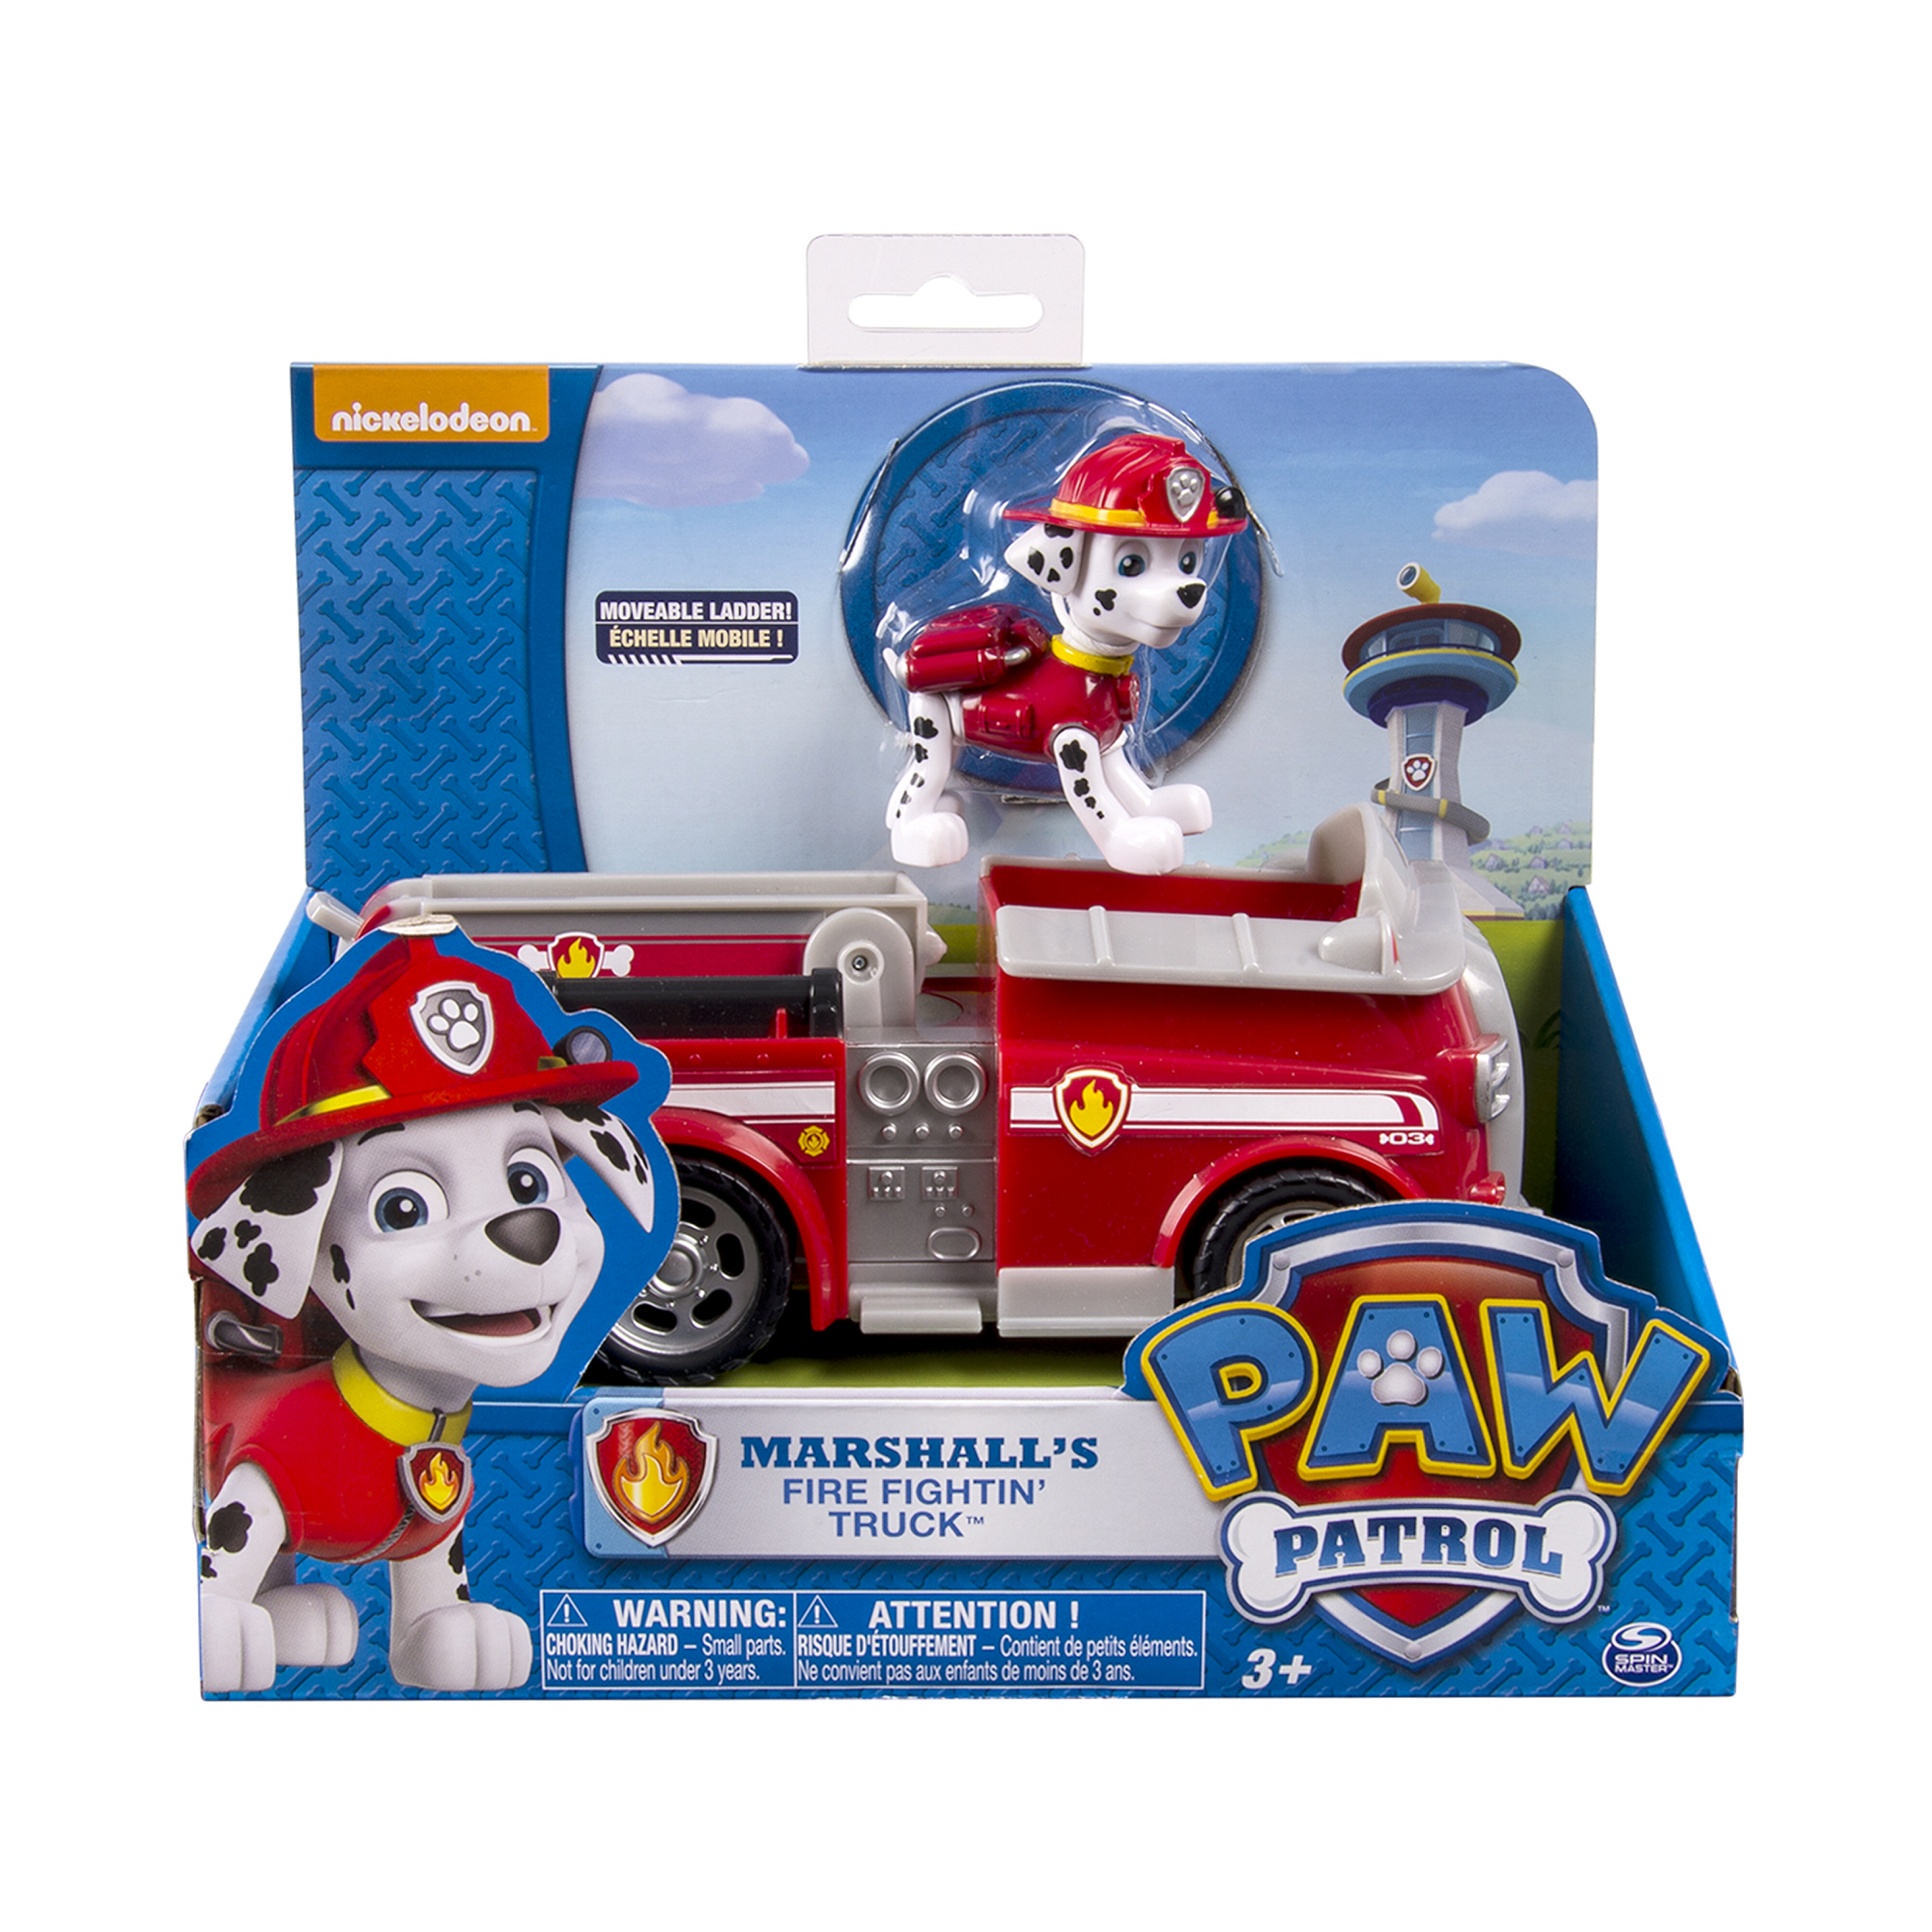 Paw Patrol Marshall's Fire Fightin' Truck, Vehicle and Figure - image 5 of 6